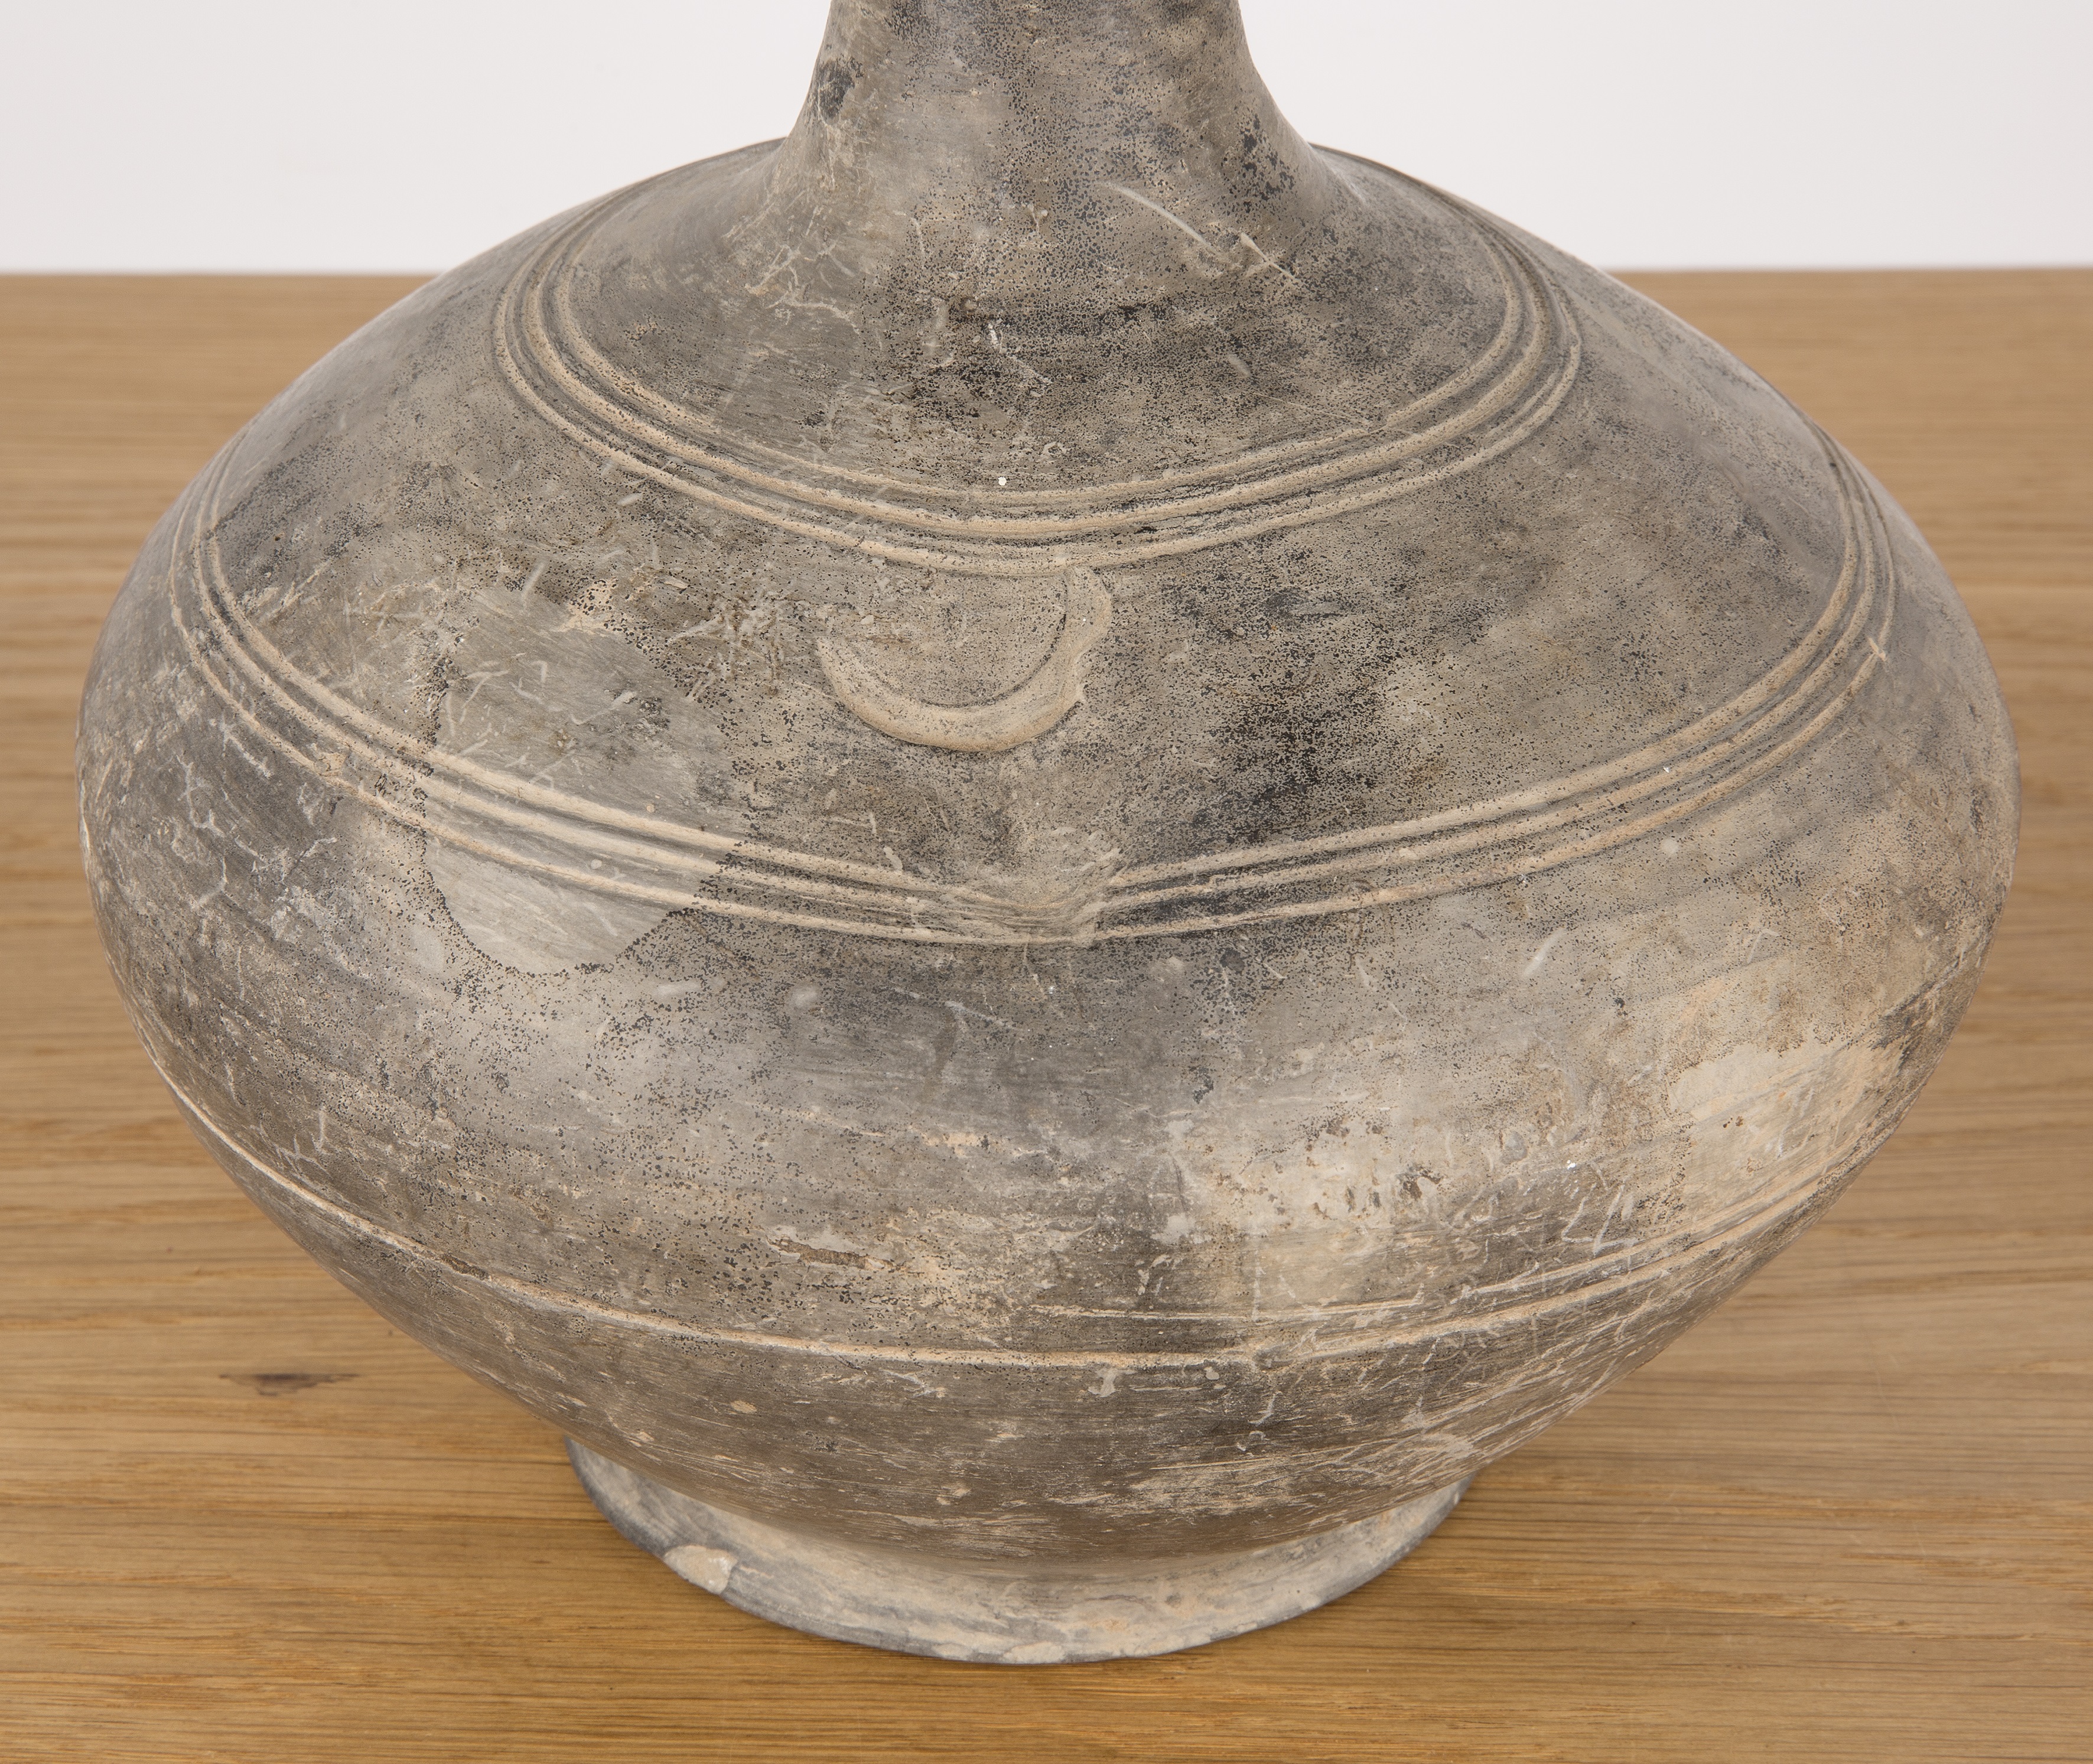 Garlic mouth funerary jar Chinese, Western Han with reeded and incised bands, 31cm high - Image 4 of 5